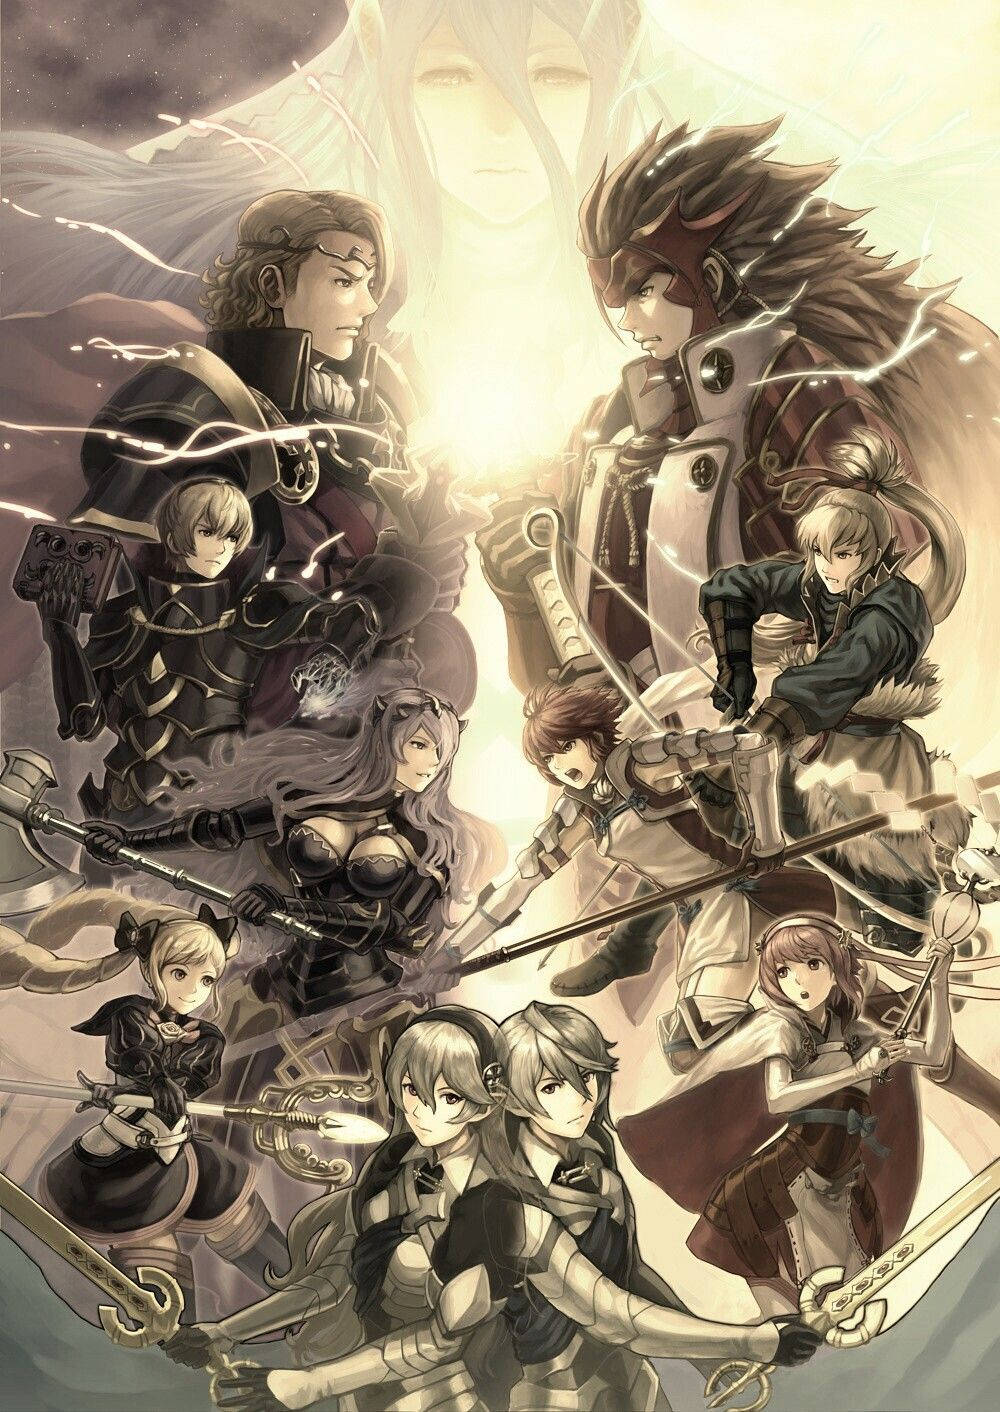 Heroes From Fire Emblem Clashing In A Swordfight Wallpaper